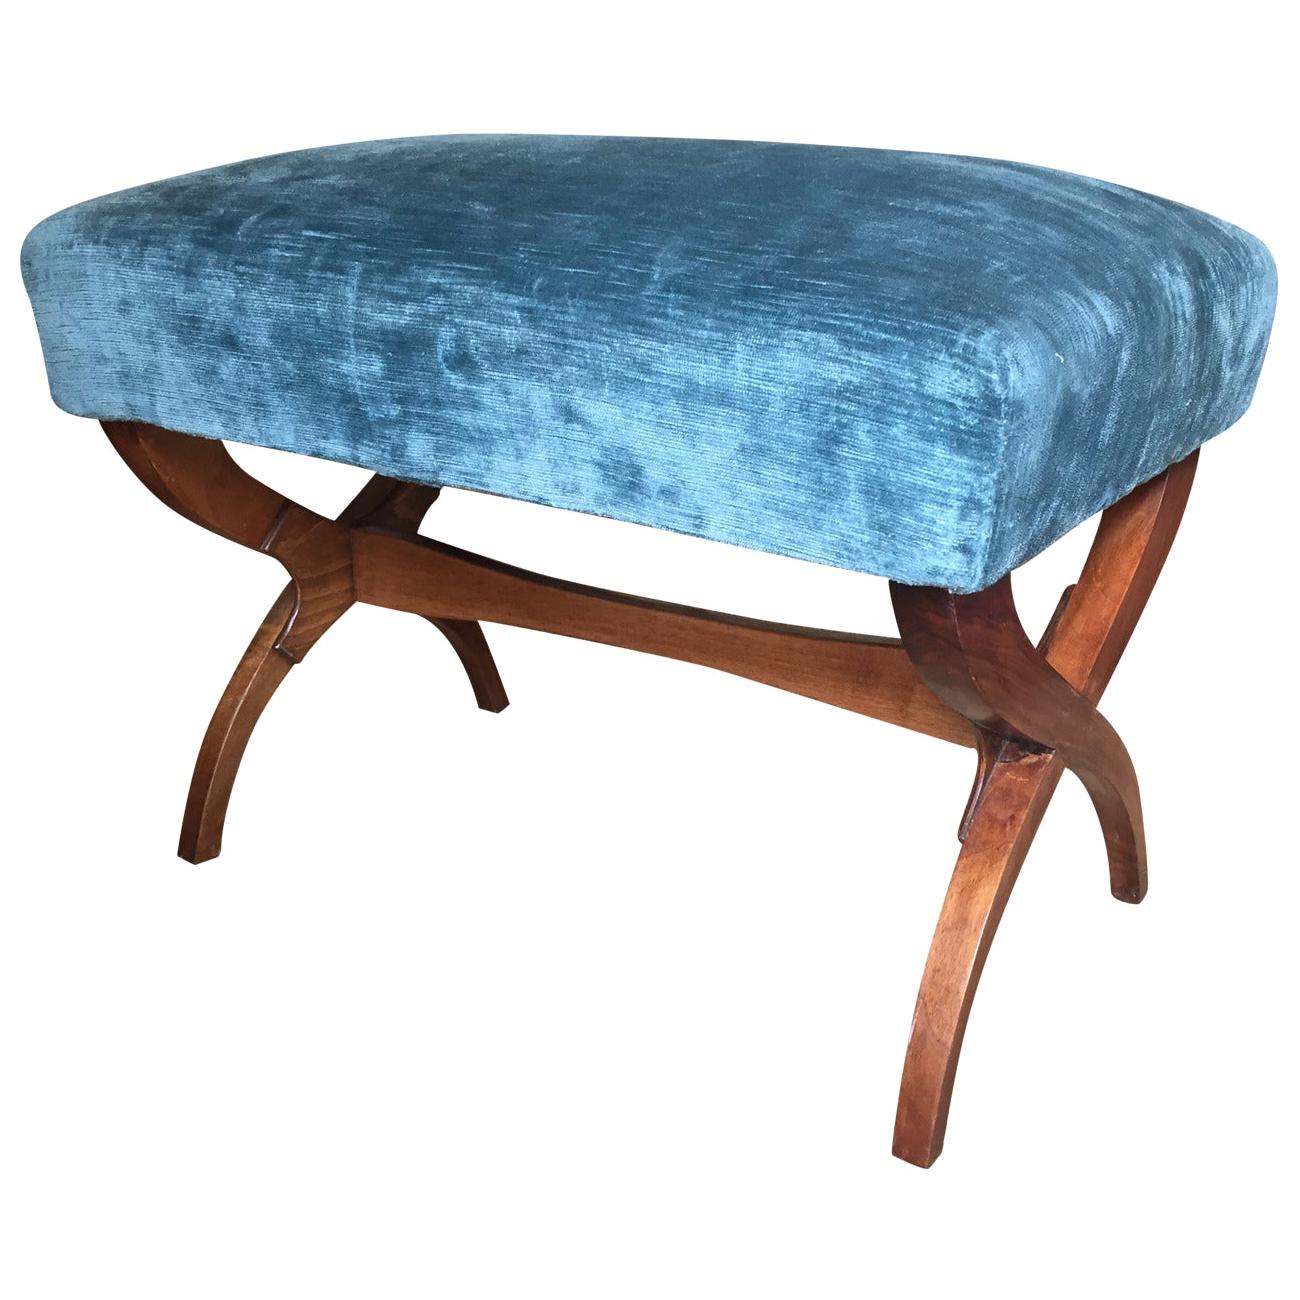 Exceptional Tomaso Buzzi Mahogany Bench For Sale